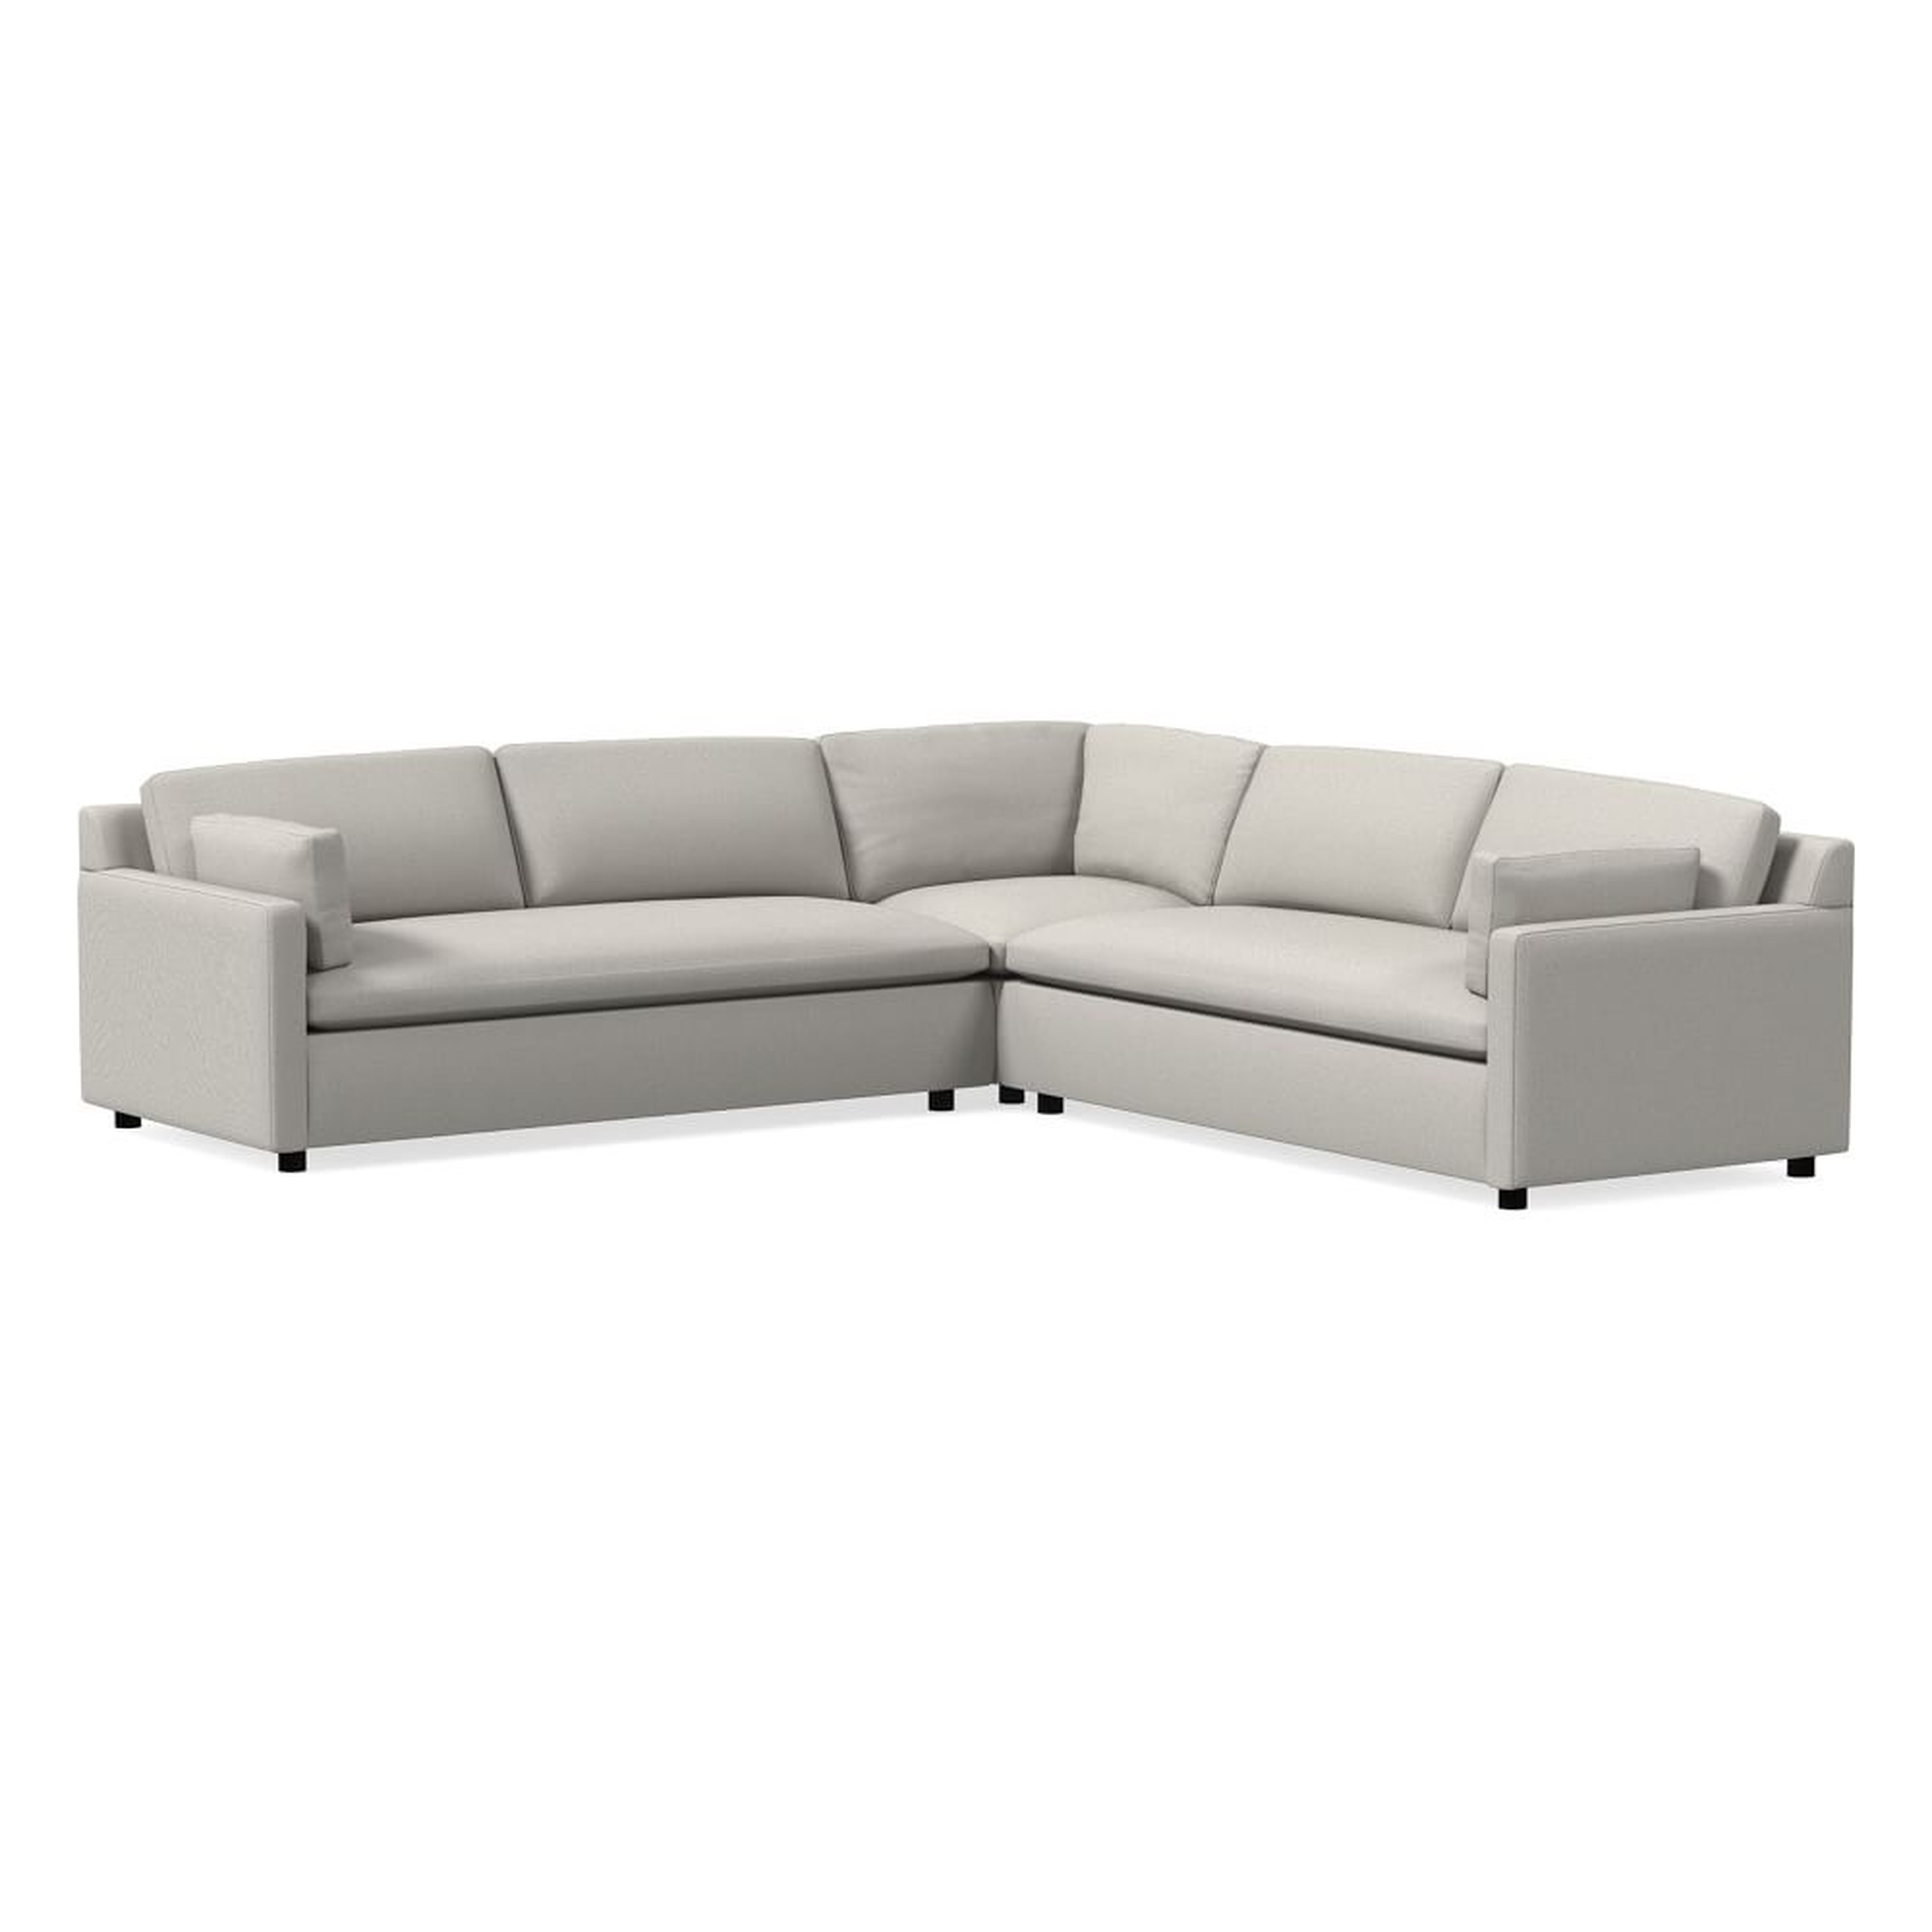 Marin Sectional Set 07: RA 75" Sofa, Corner, LA 75" Sofa, Down, Performance Yarn Dyed Linen Weave, Frost Gray, Concealed Support - West Elm